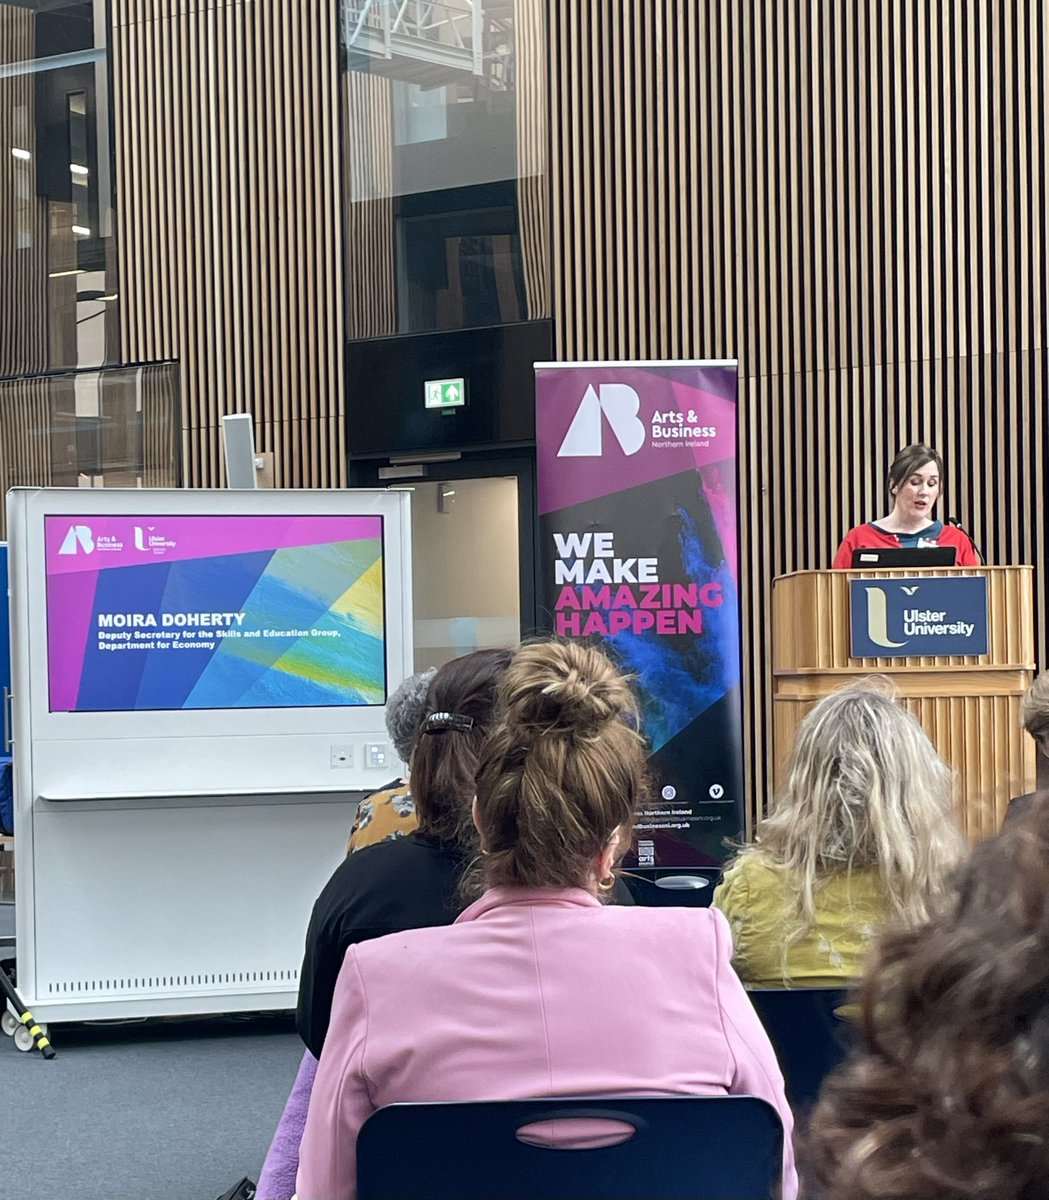 Moira Doherty speaking of the Dept of Economy @NIOgov support for and acknowledgement of the central role of creativity and arts for #NorthernIreland 
#inclusiveinnovation @StudyAtUlster @UlsterUni @ArtsCouncilNI #ArtsBusiness